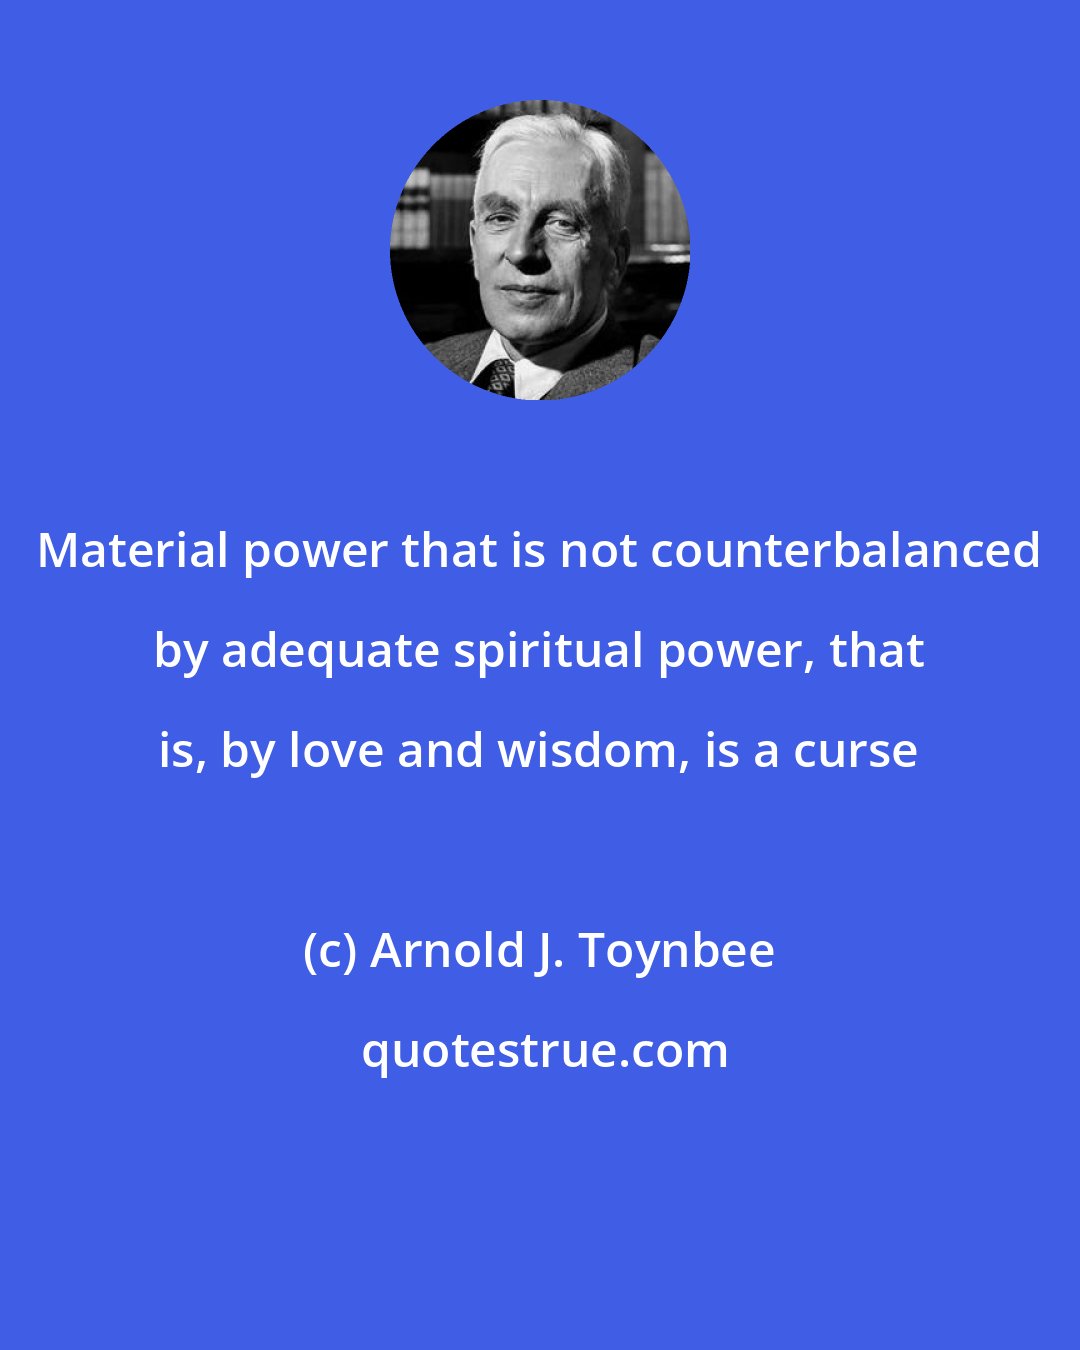 Arnold J. Toynbee: Material power that is not counterbalanced by adequate spiritual power, that is, by love and wisdom, is a curse